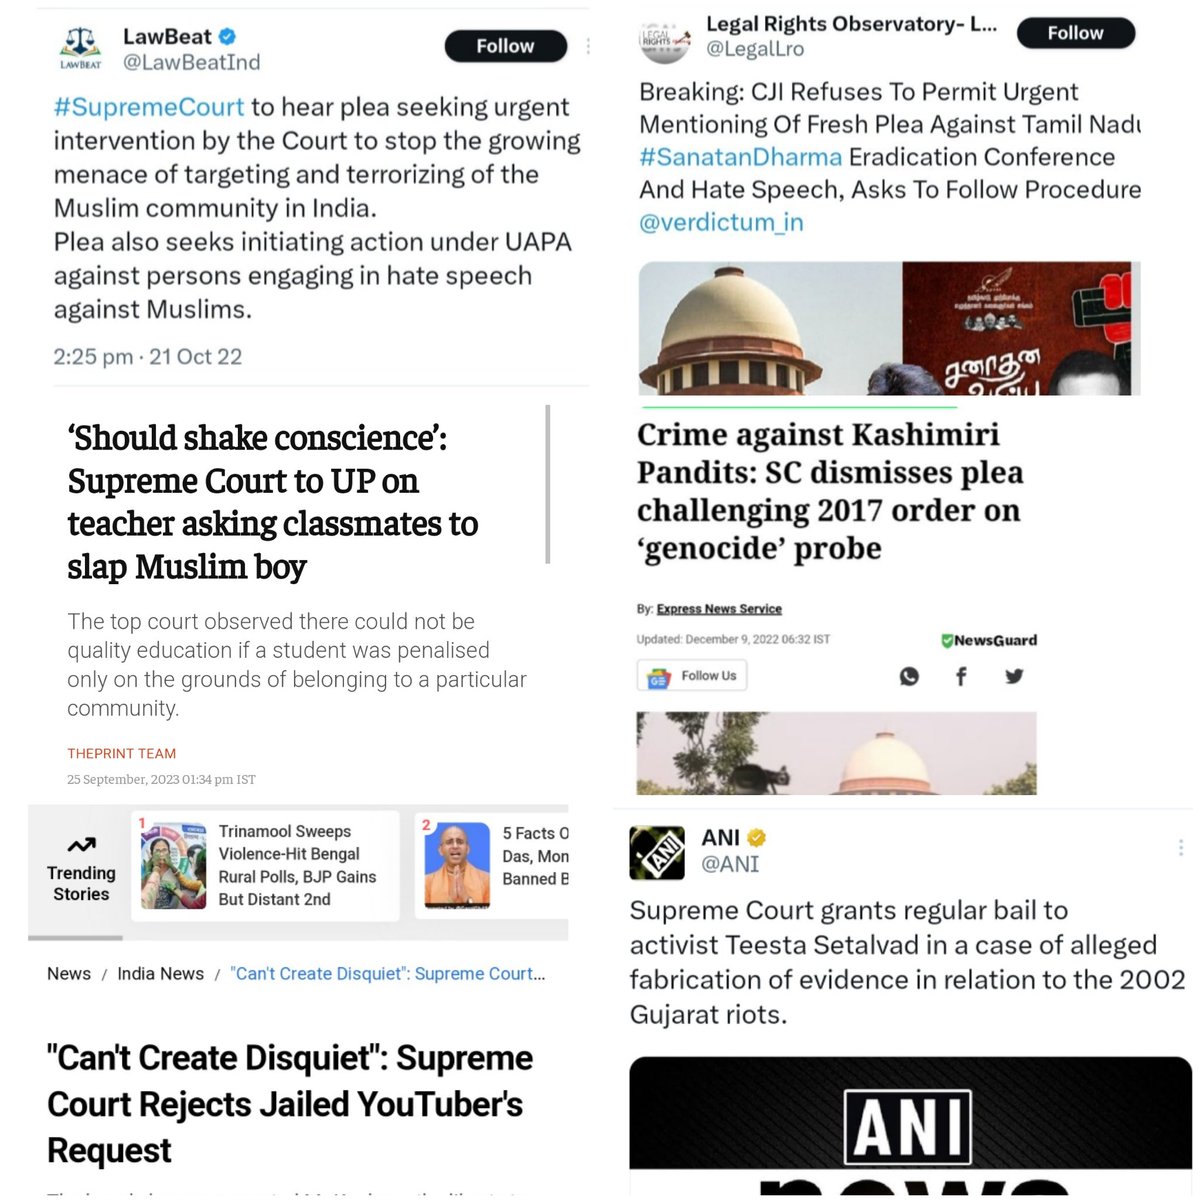 -Hate speech against MusIims: Urgent hearing
-Hate speech against Hindus: Get lost

-A MusIim kid slapped : How inhuman
-Thousands of Hindus are kiIIed : Get lost

-Naxali Arundhati Roy : Shouldn't be in jail
-Manish Kashyap : Rot in jail

#SupremeCourt in a nutshell.